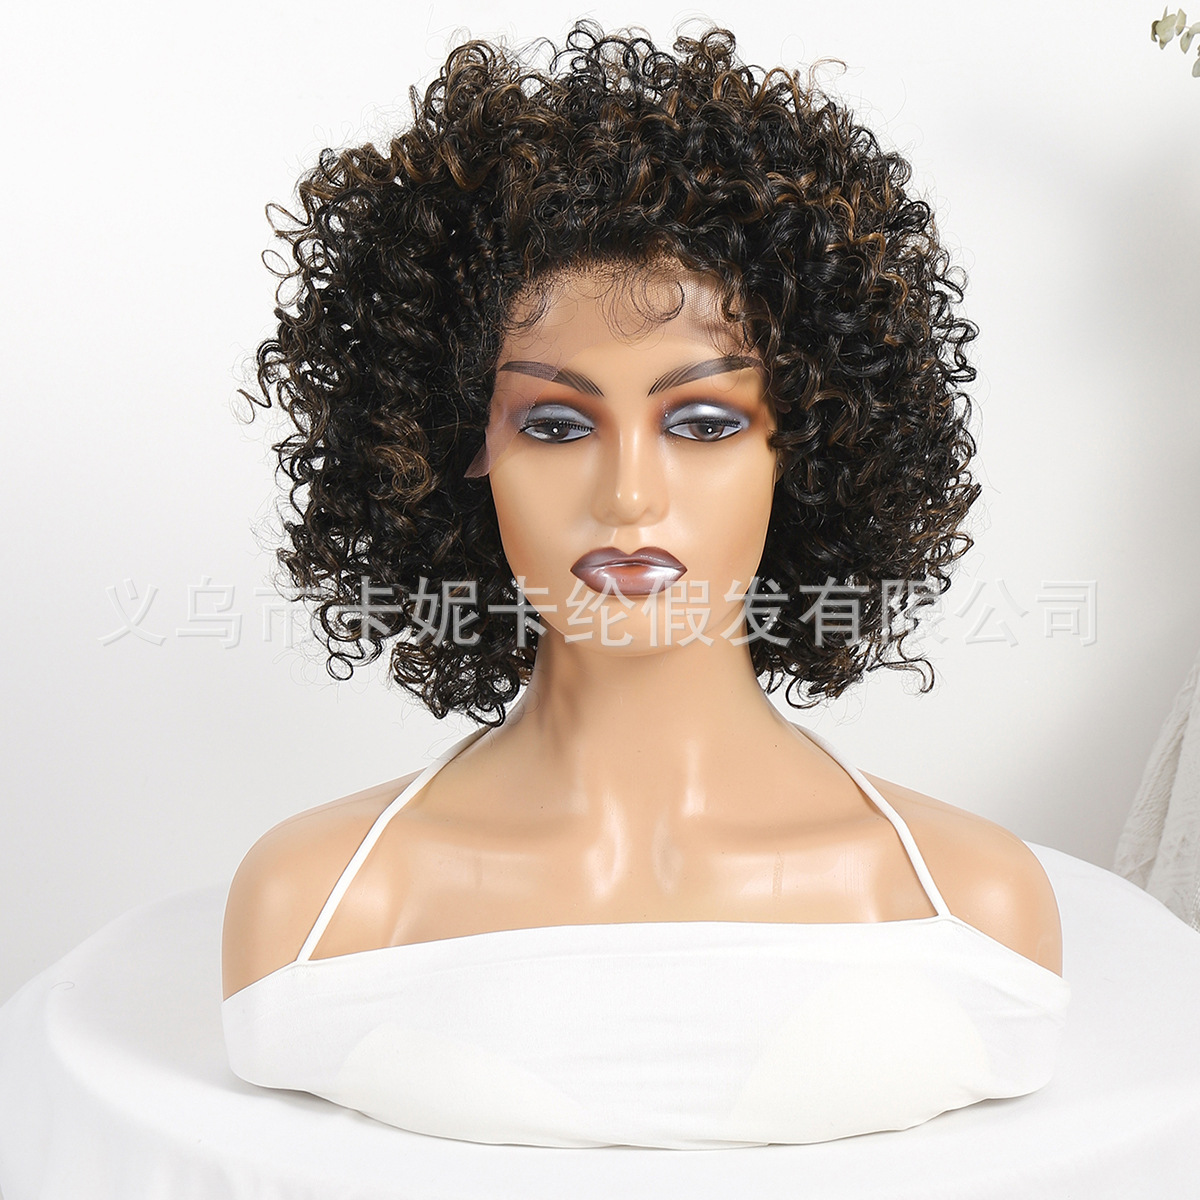 newlook foreign trade african black short curly hair fluffy small curly hair new chemical fiber wig hair wig